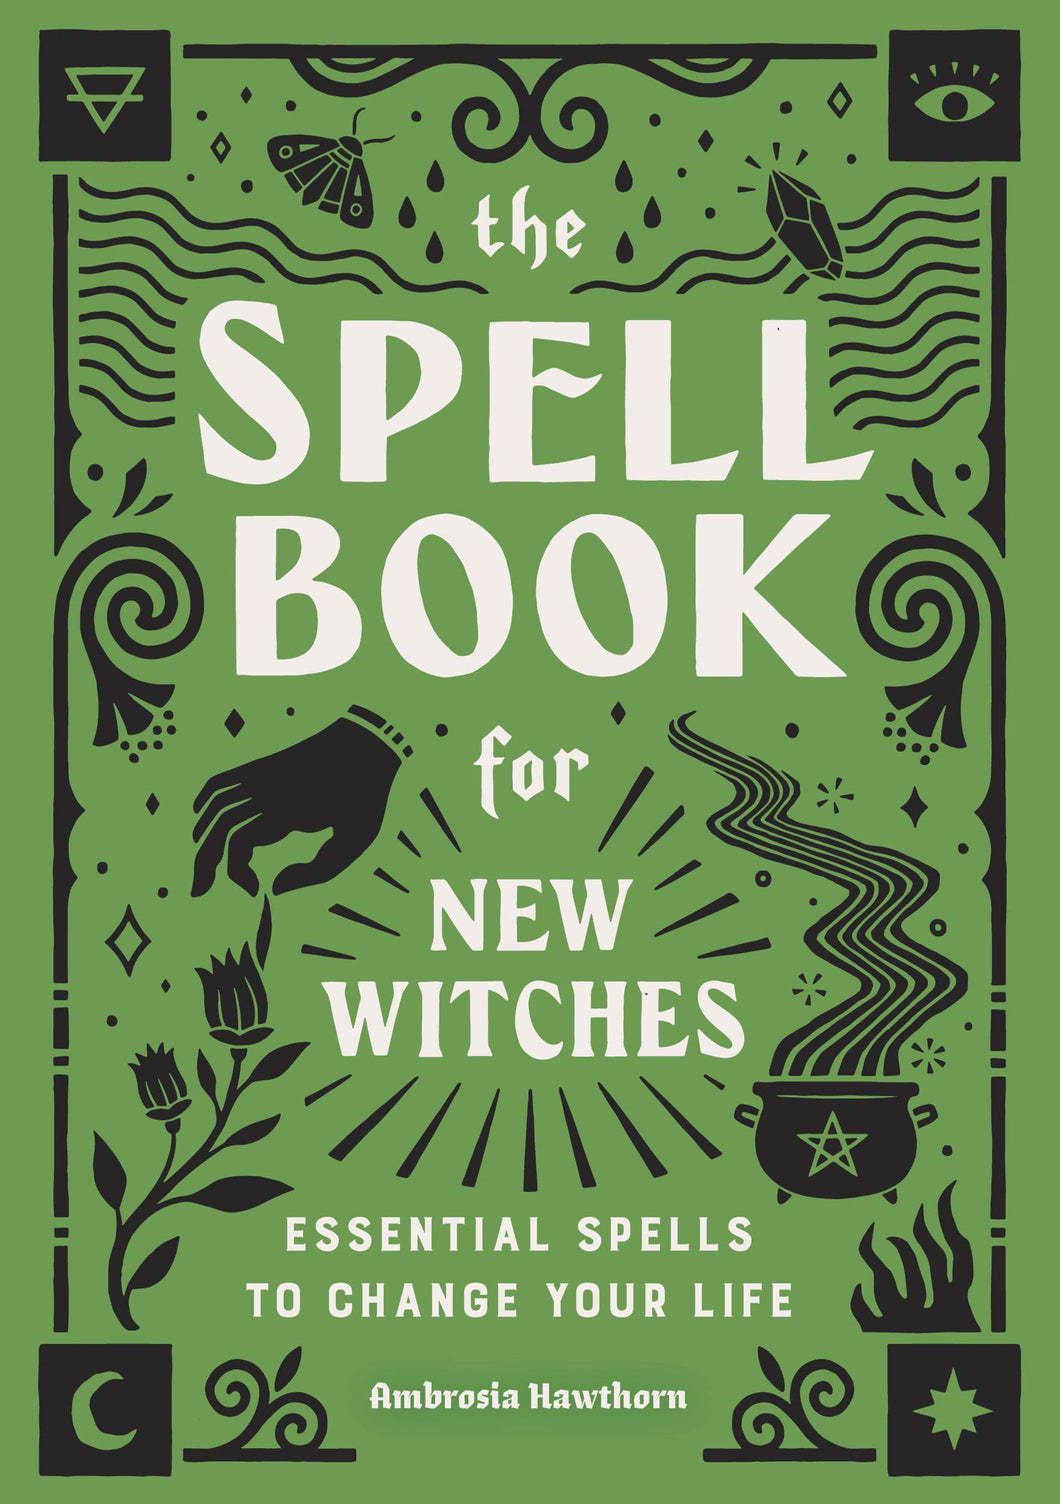 The Spell Book for New Witches by Ambrosia Hawthorn